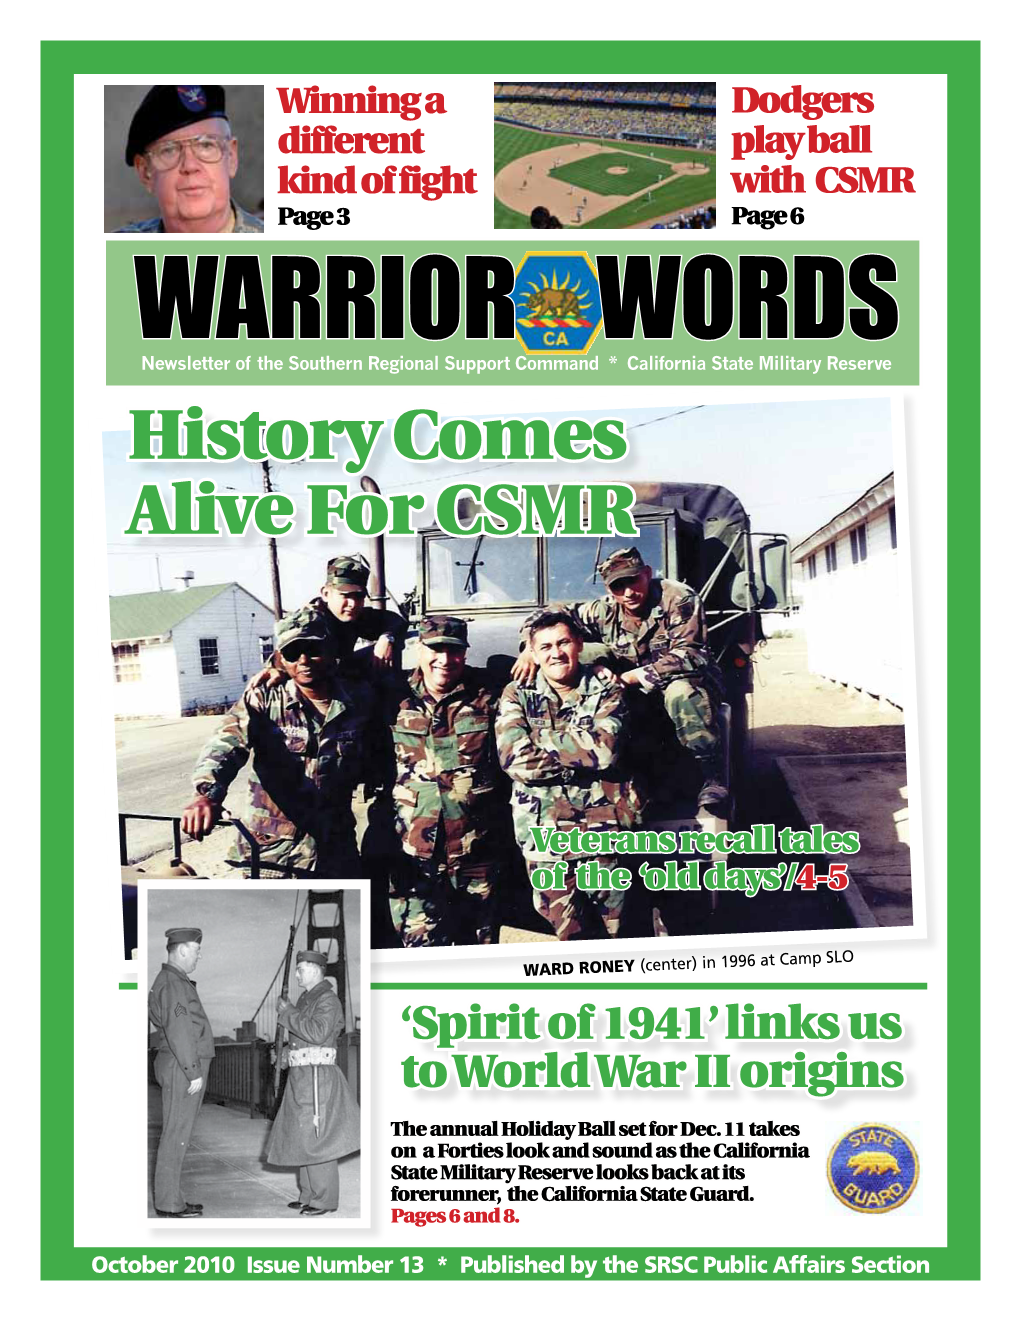 WARRIOR WORDS Newsletter of the Southern Regional Support Command * California State Military Reserve History Comes Alive for CSMR